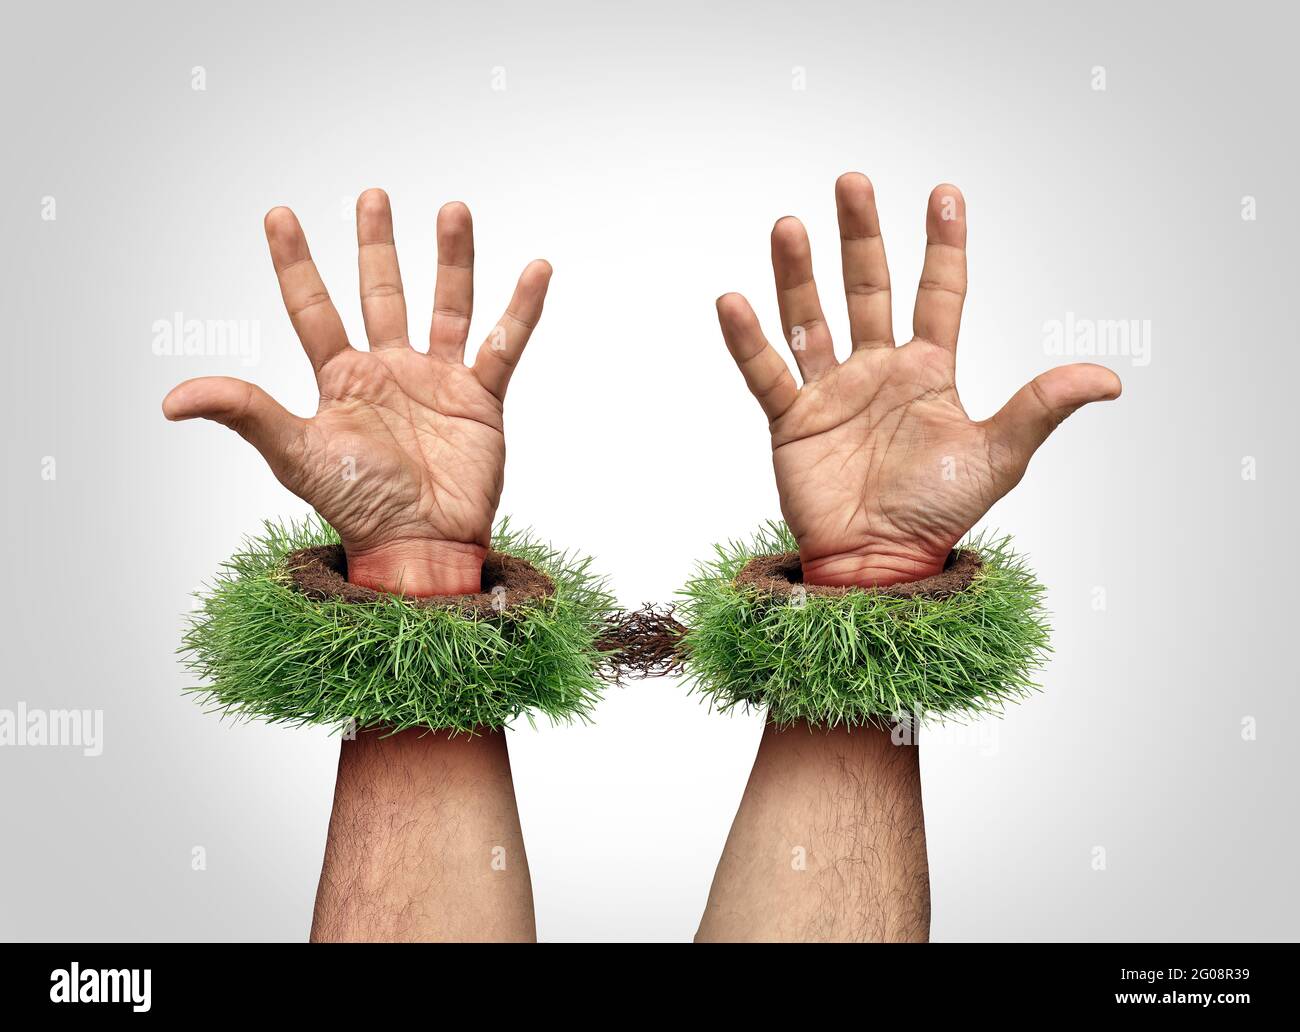 Garden work concept and being a slave to your yard chores as mowing grass and backyard landscaping job as trapped hands with handcuffs or hand cuffs. Stock Photo